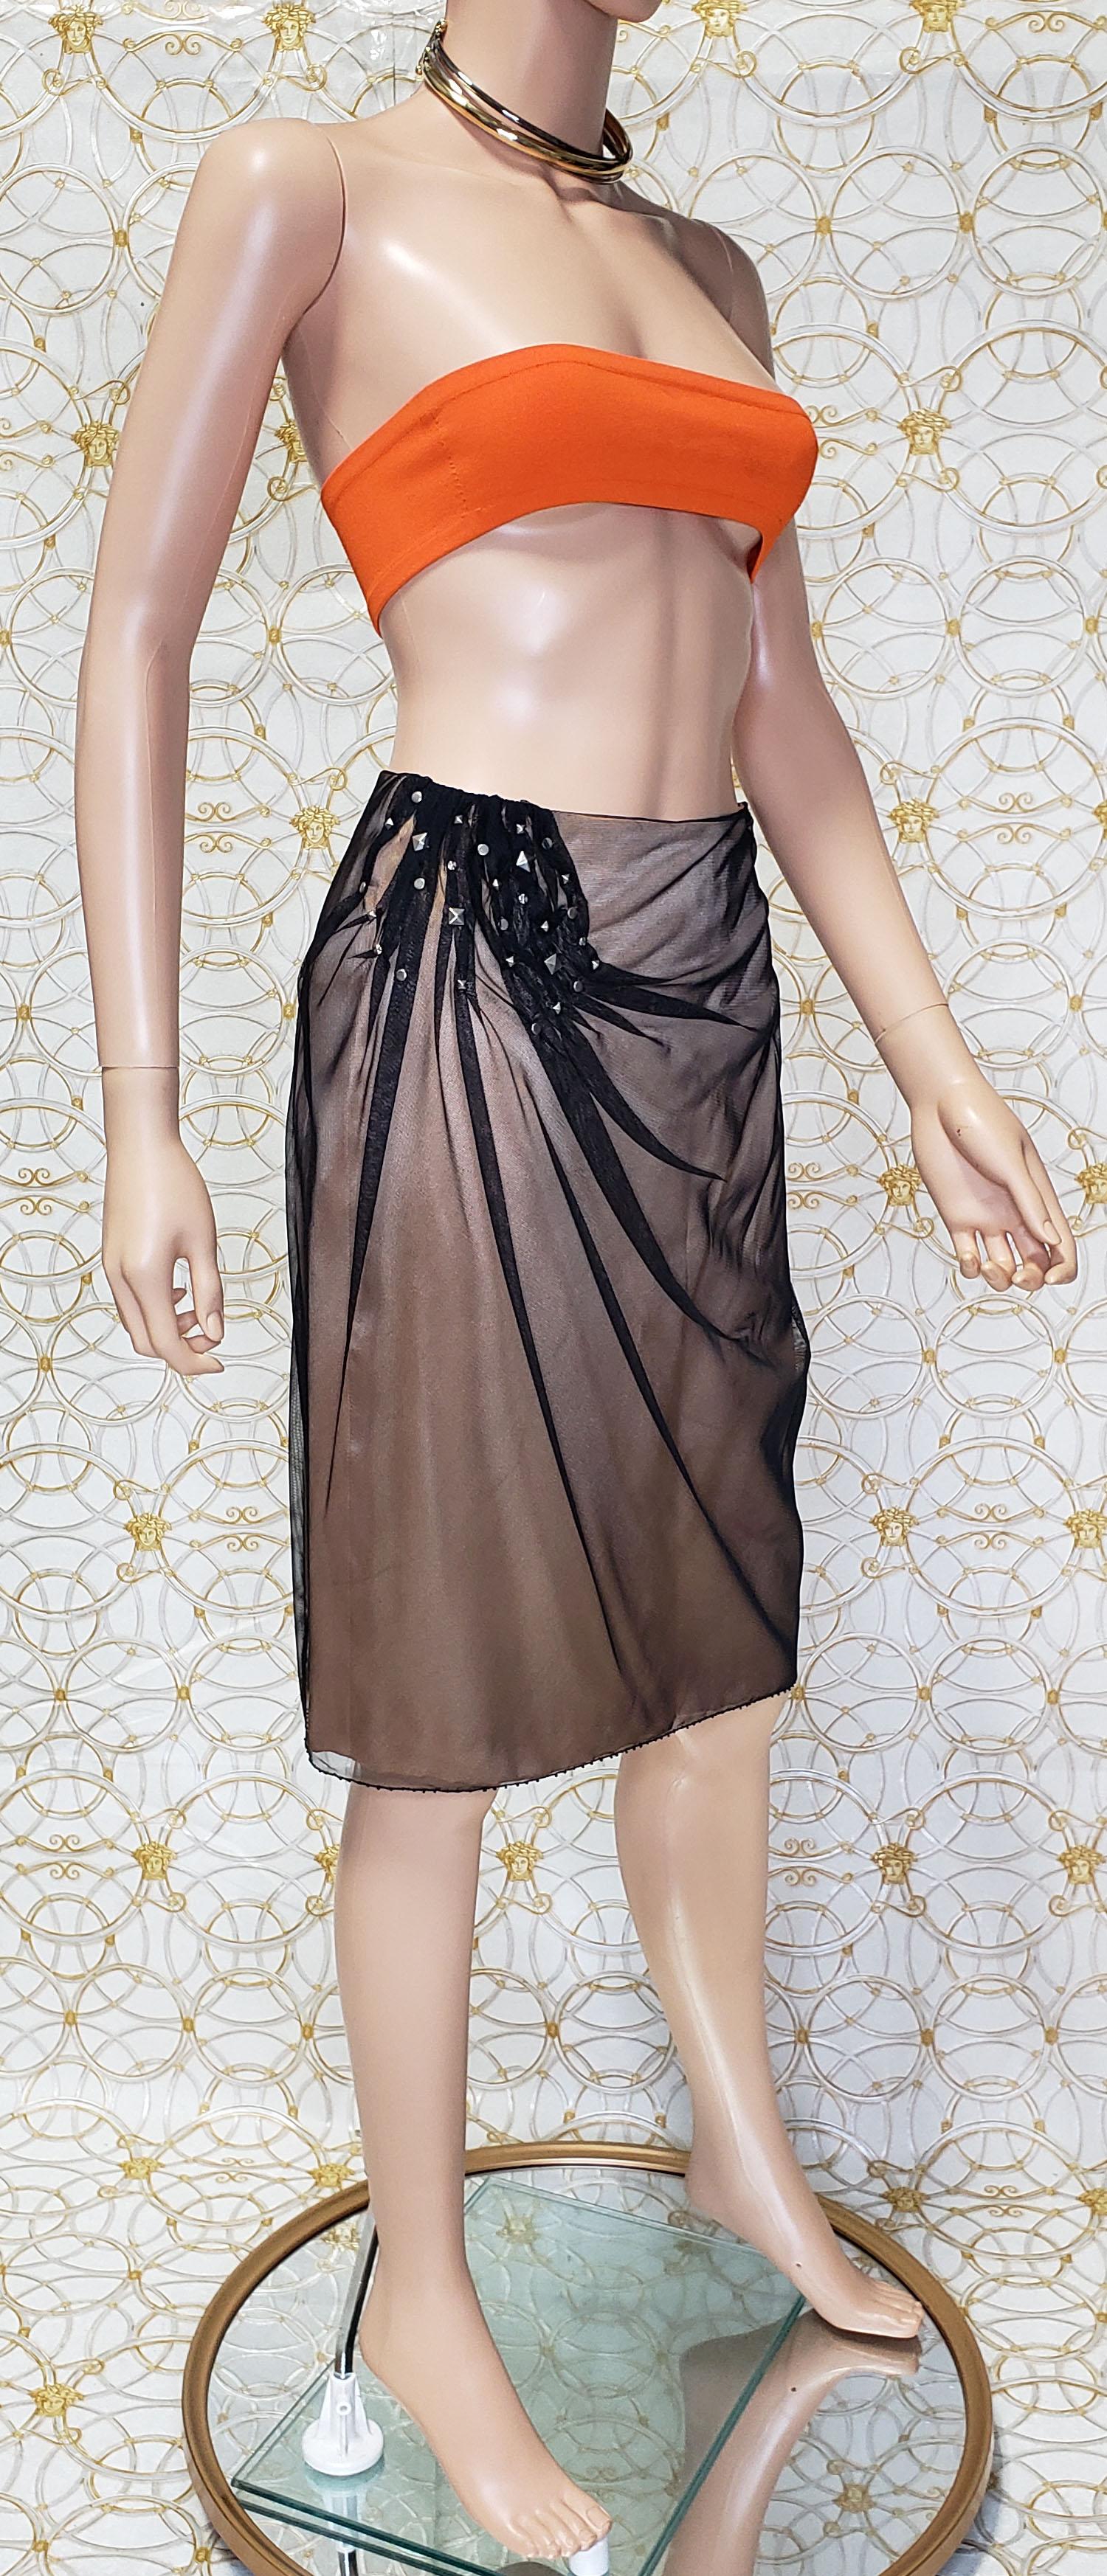 NEW VINTAGE GIANNI VERSACE BEIGE and BLACK TULLE MIDI SKIRT 42 - 6 For Sale 2